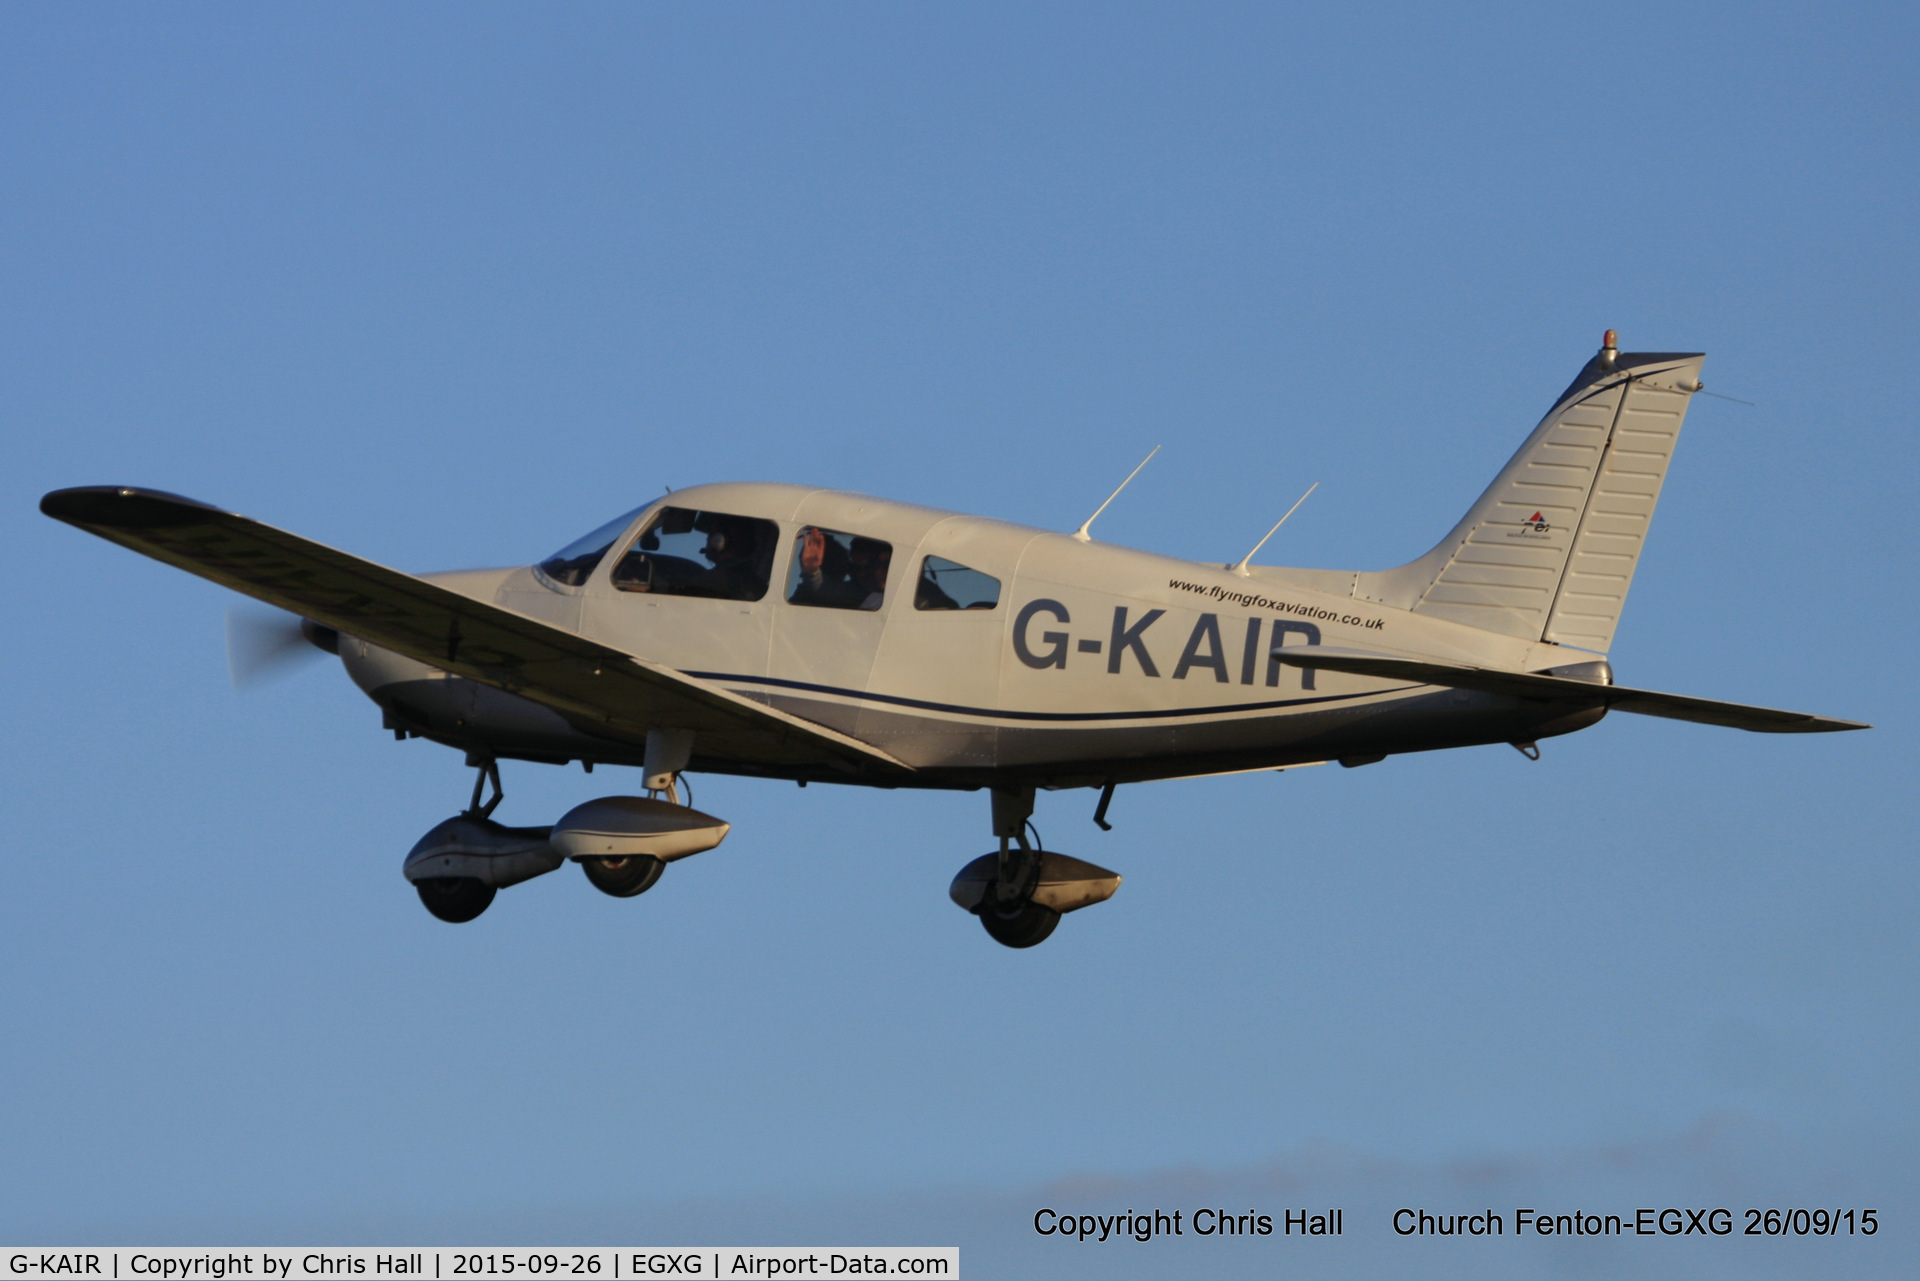 G-KAIR, 1978 Piper PA-28-181 Cherokee Archer II C/N 28-7990176, at the Yorkshire Airshow